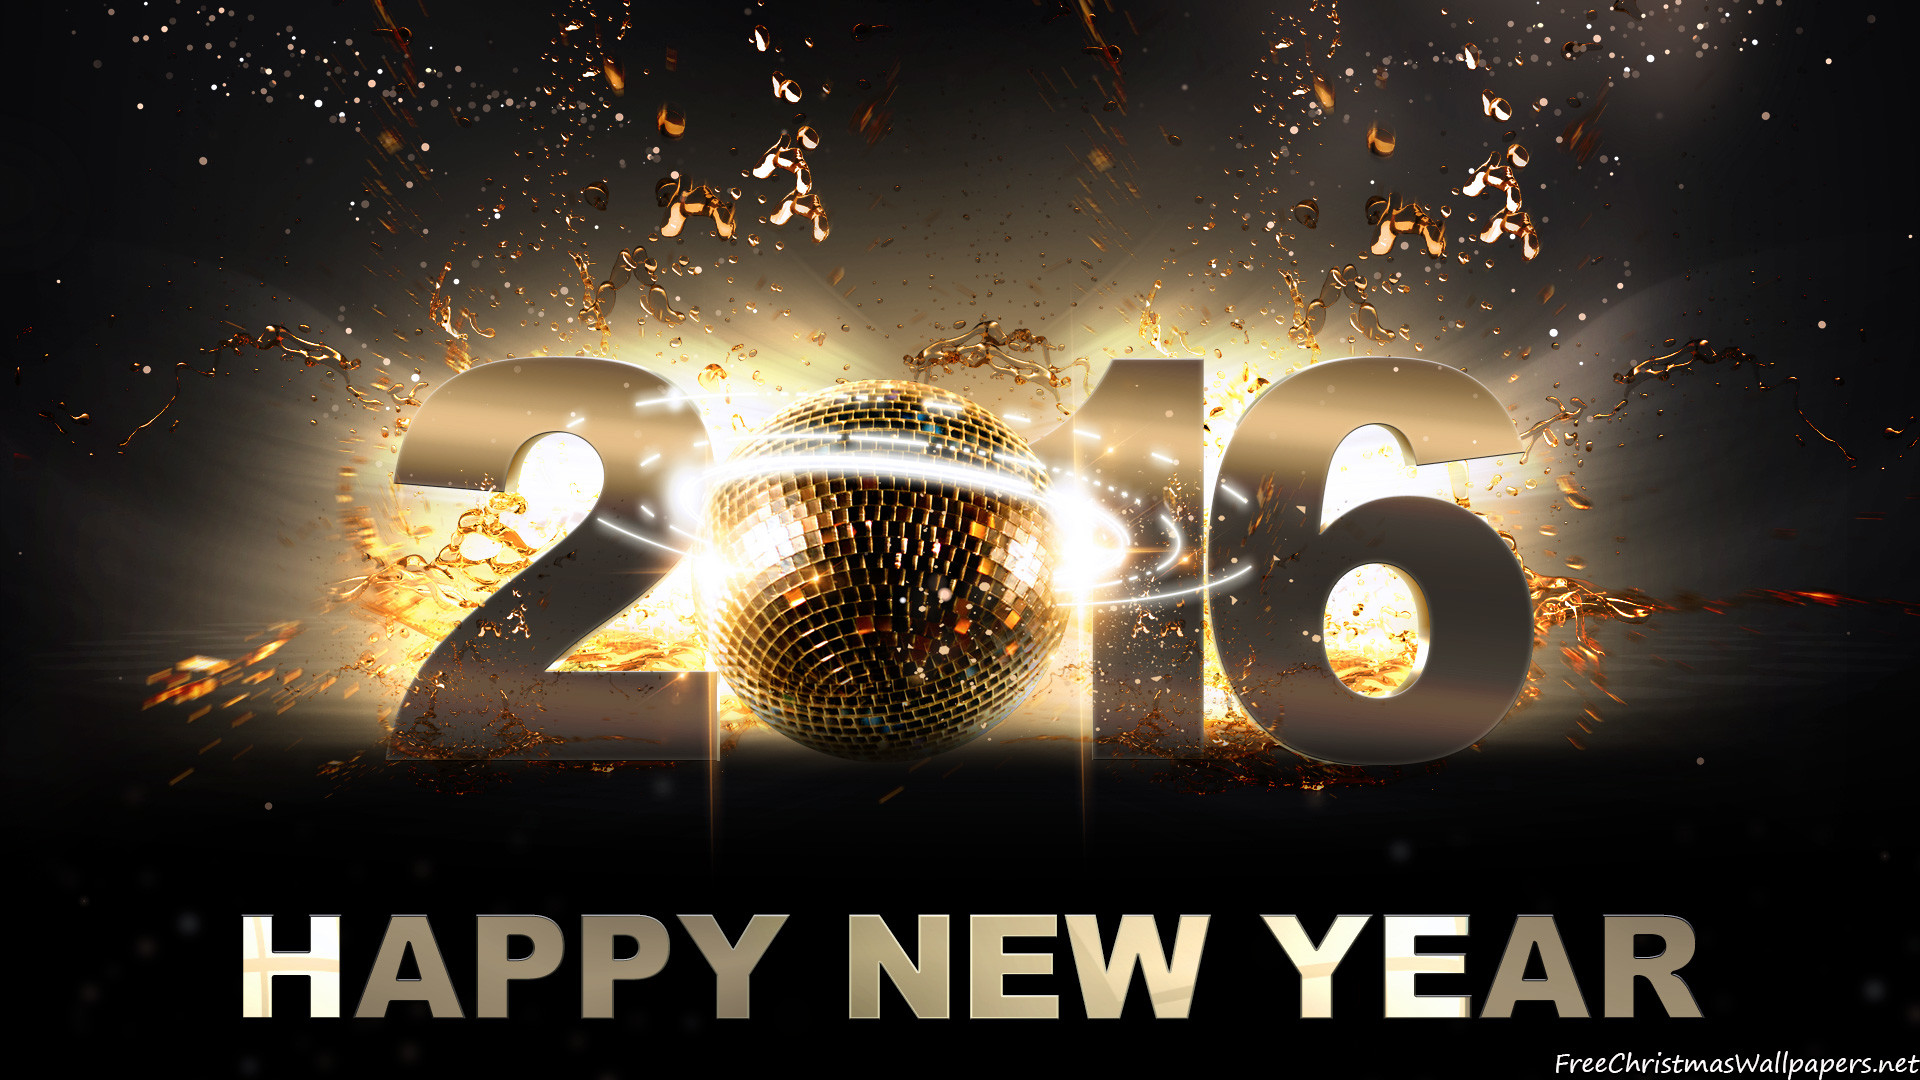 1920x1080 New Year Wallpapers, New Year Backgrounds for Windows and Mac .